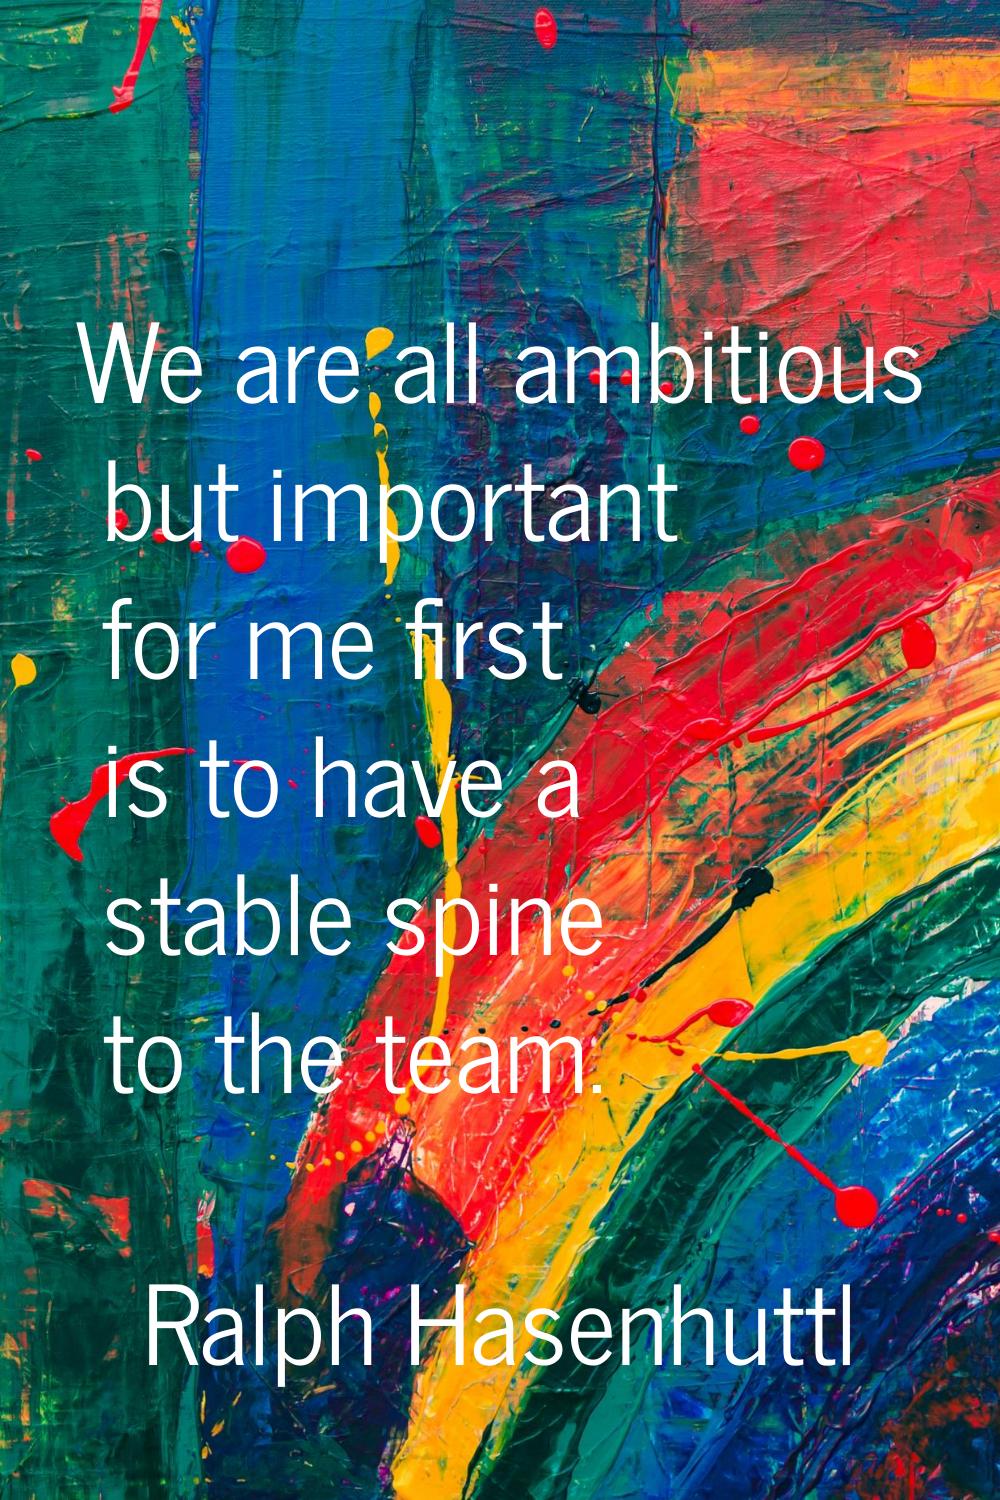 We are all ambitious but important for me first is to have a stable spine to the team.